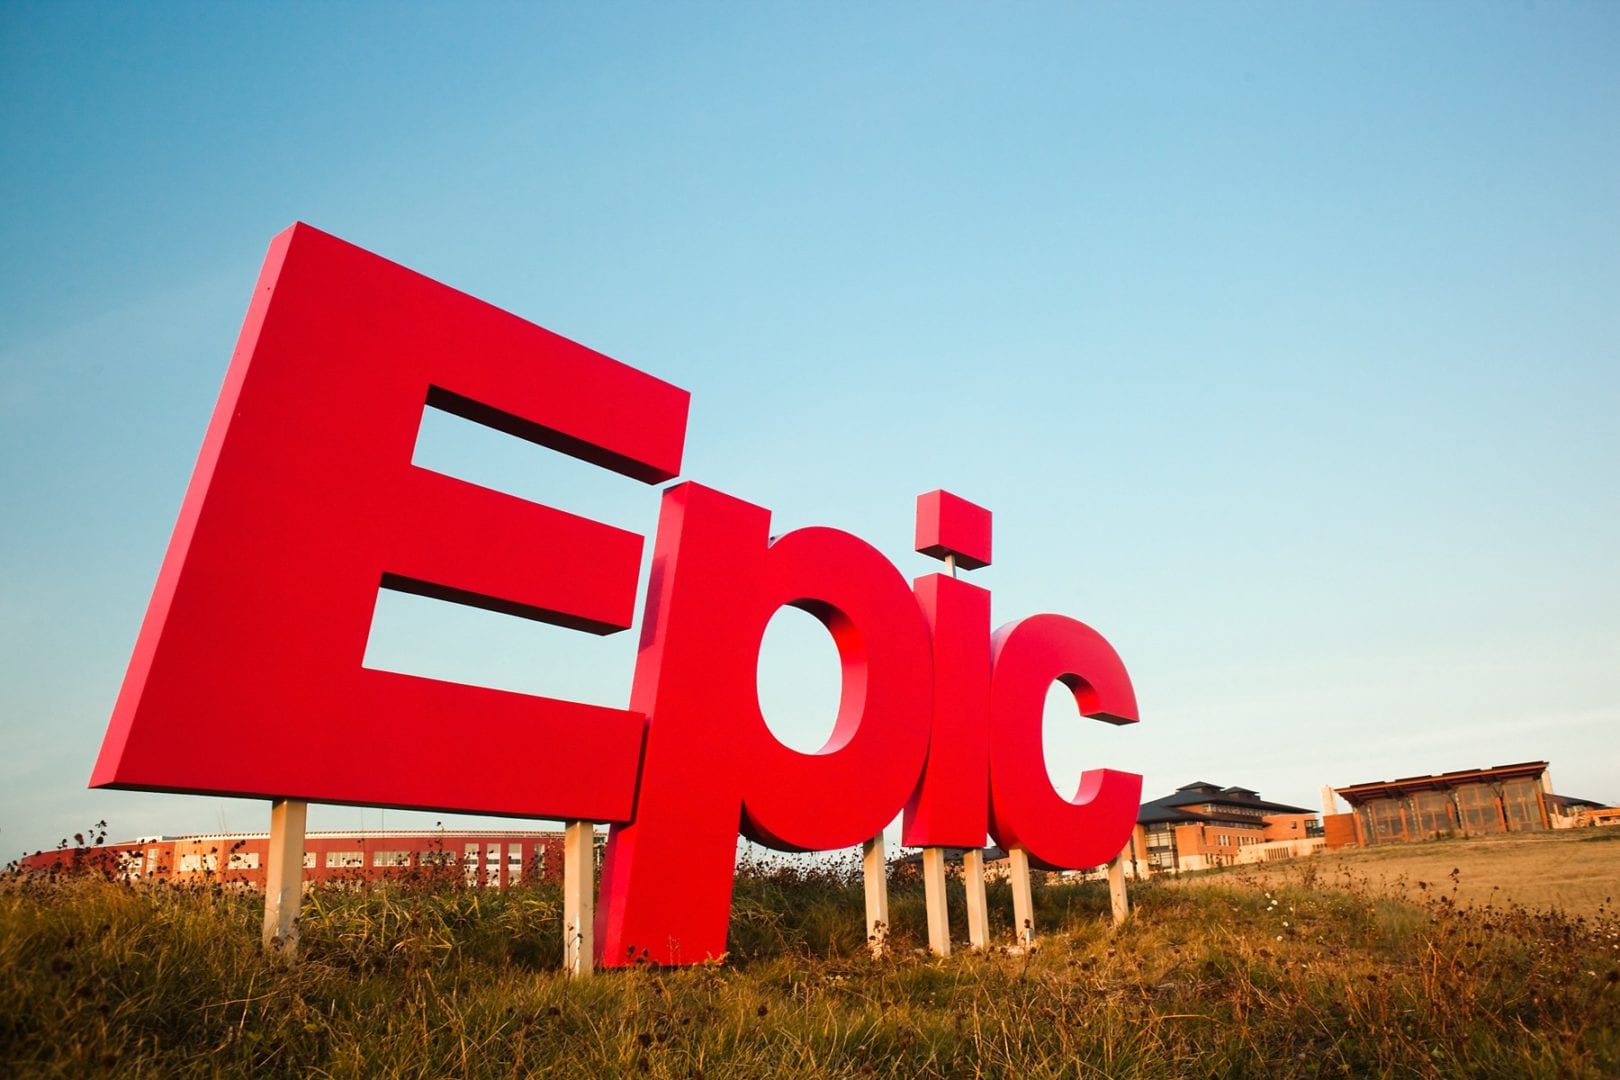 Epic systems